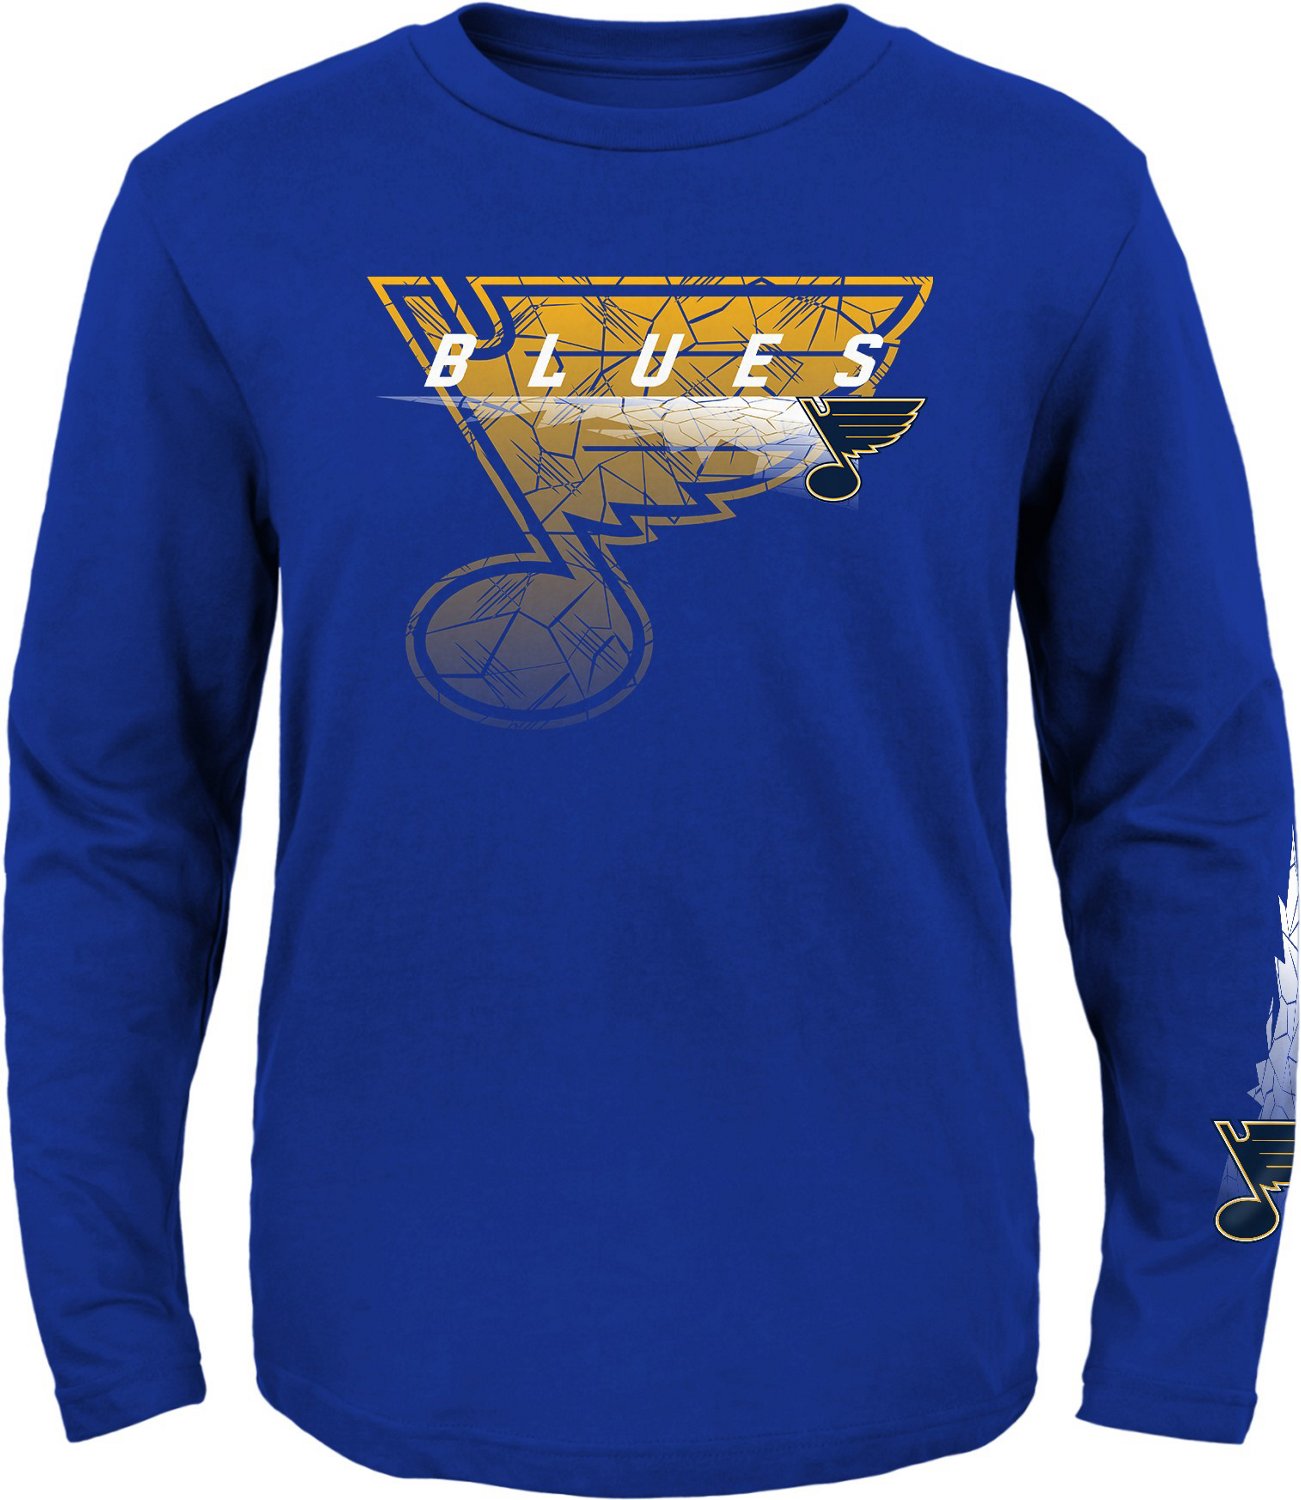 Outerstuff Boys' St. Louis Blues Cracked Ice Long Sleeve T-shirt